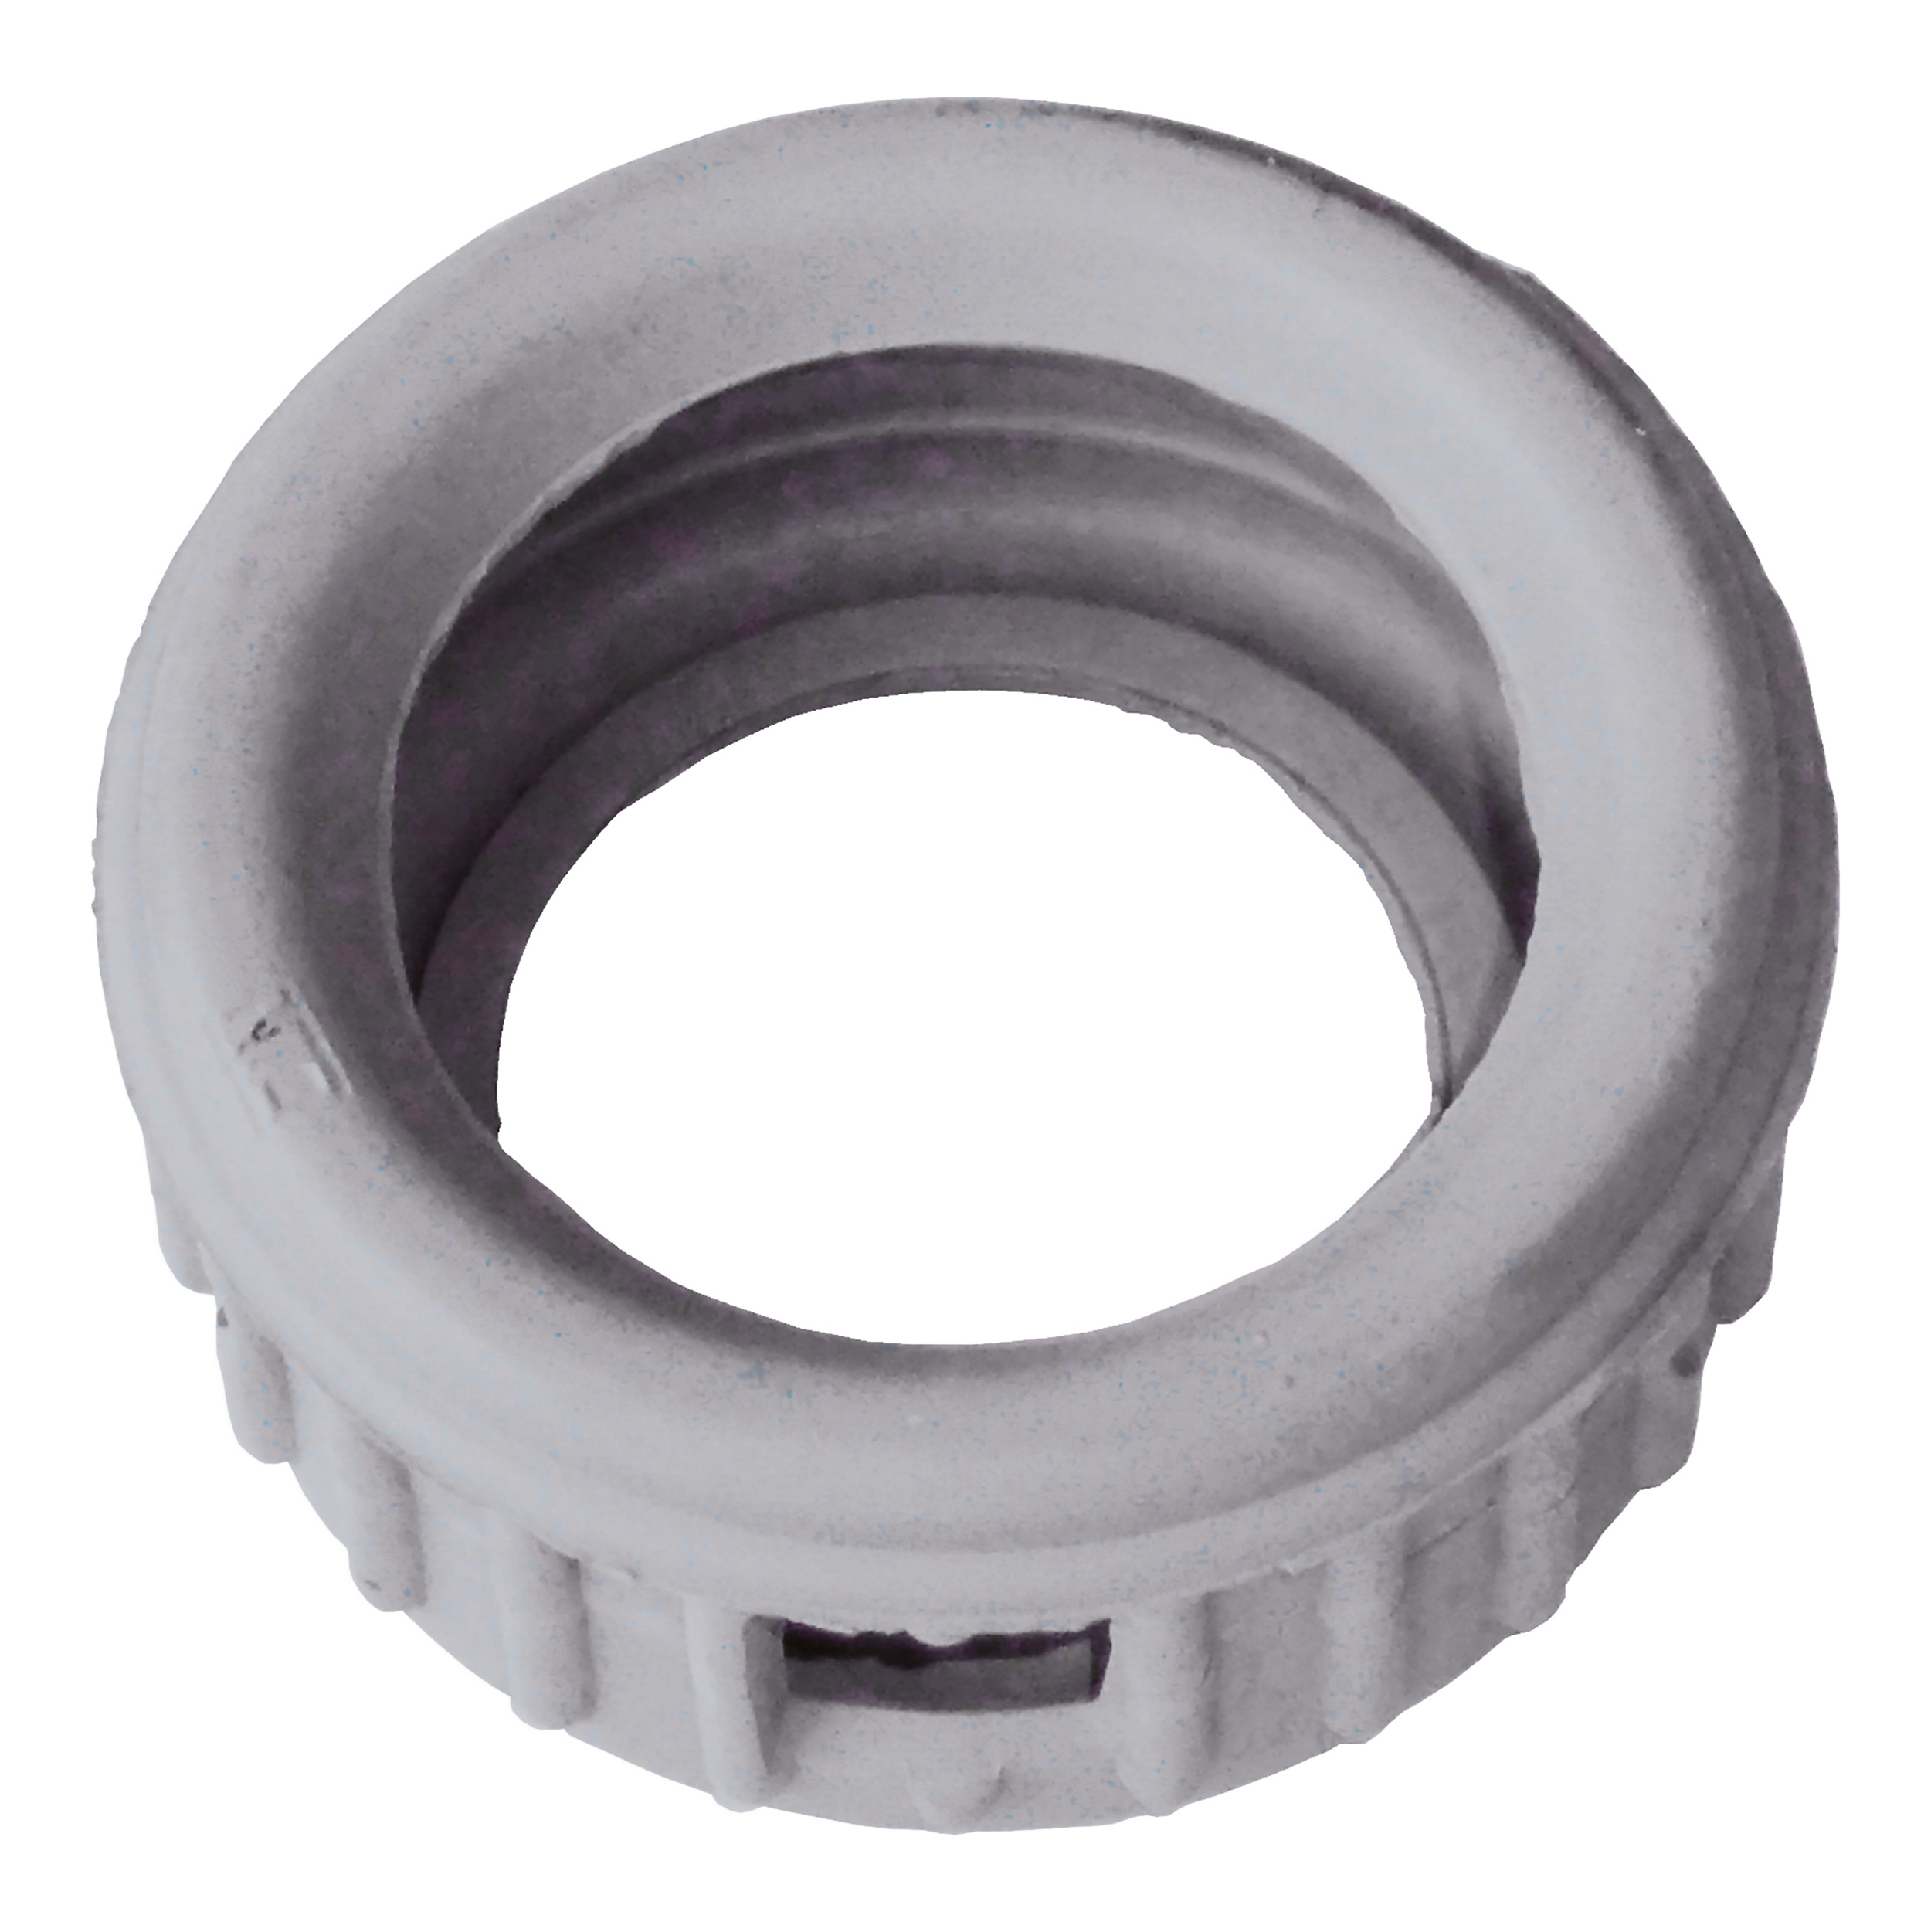 Rubber Protection Cap, Ø 63mm, Grey Colored